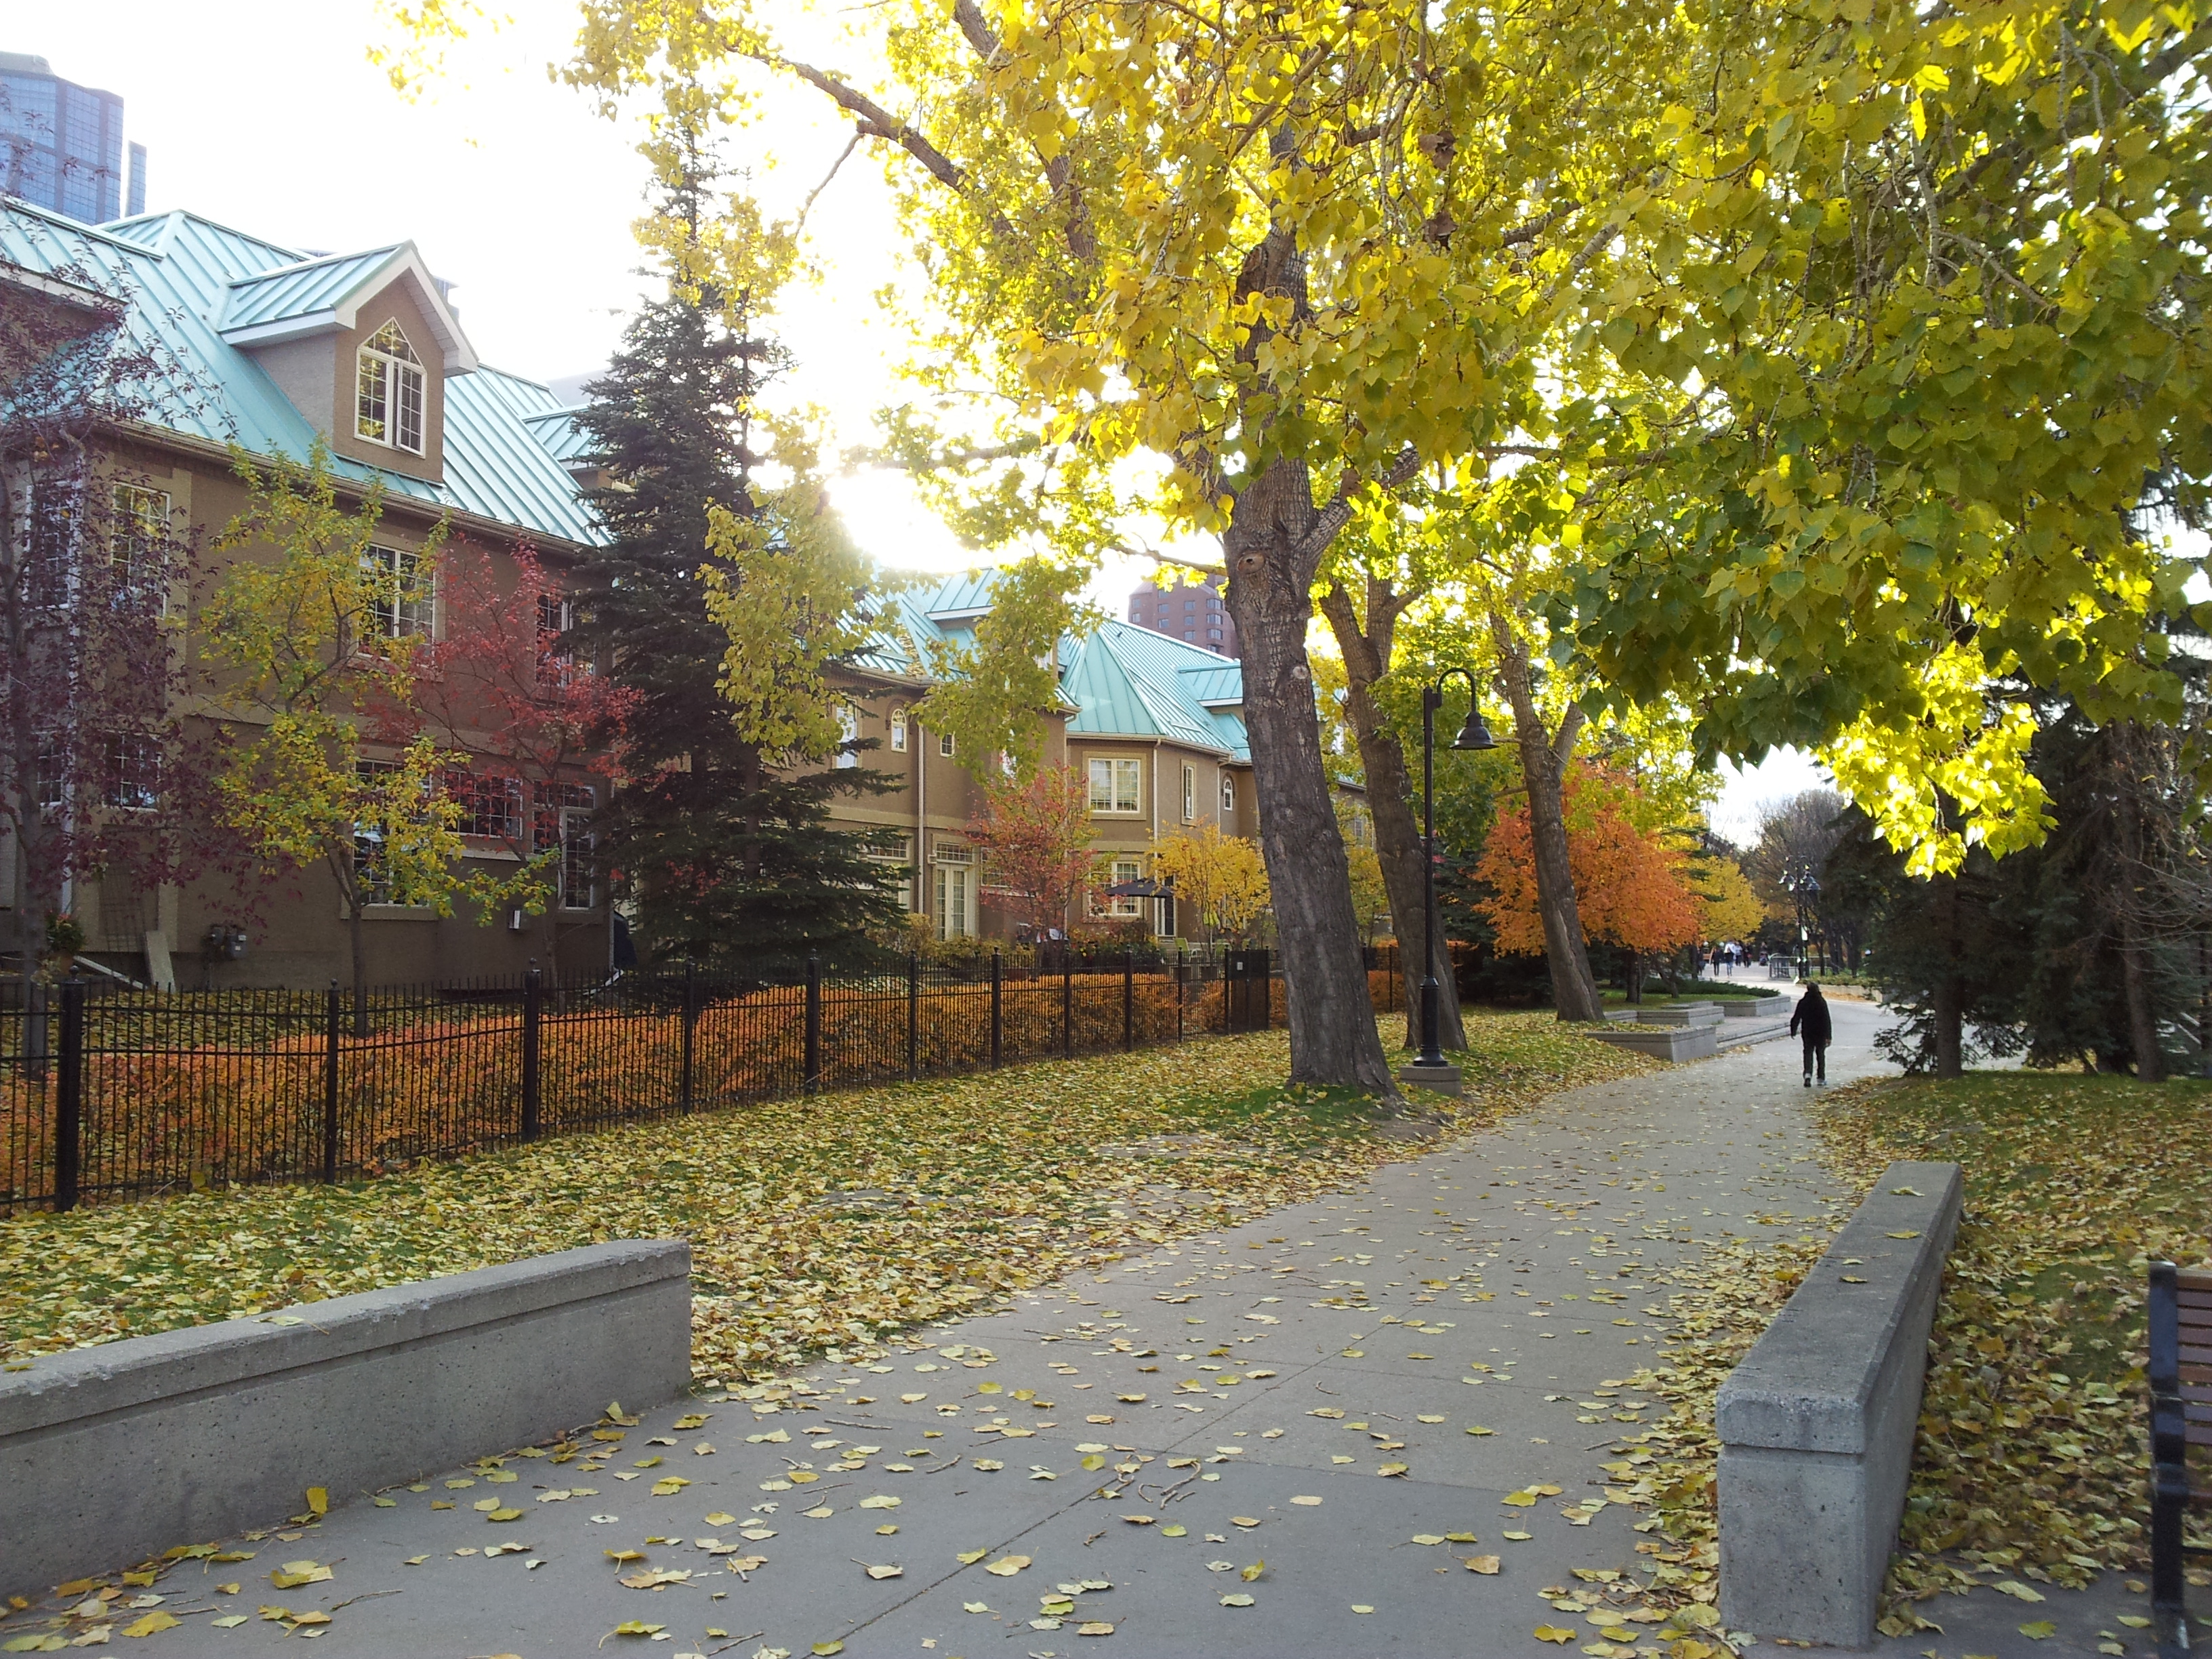 6 The Fall - Eau Claire Pathway Calgary